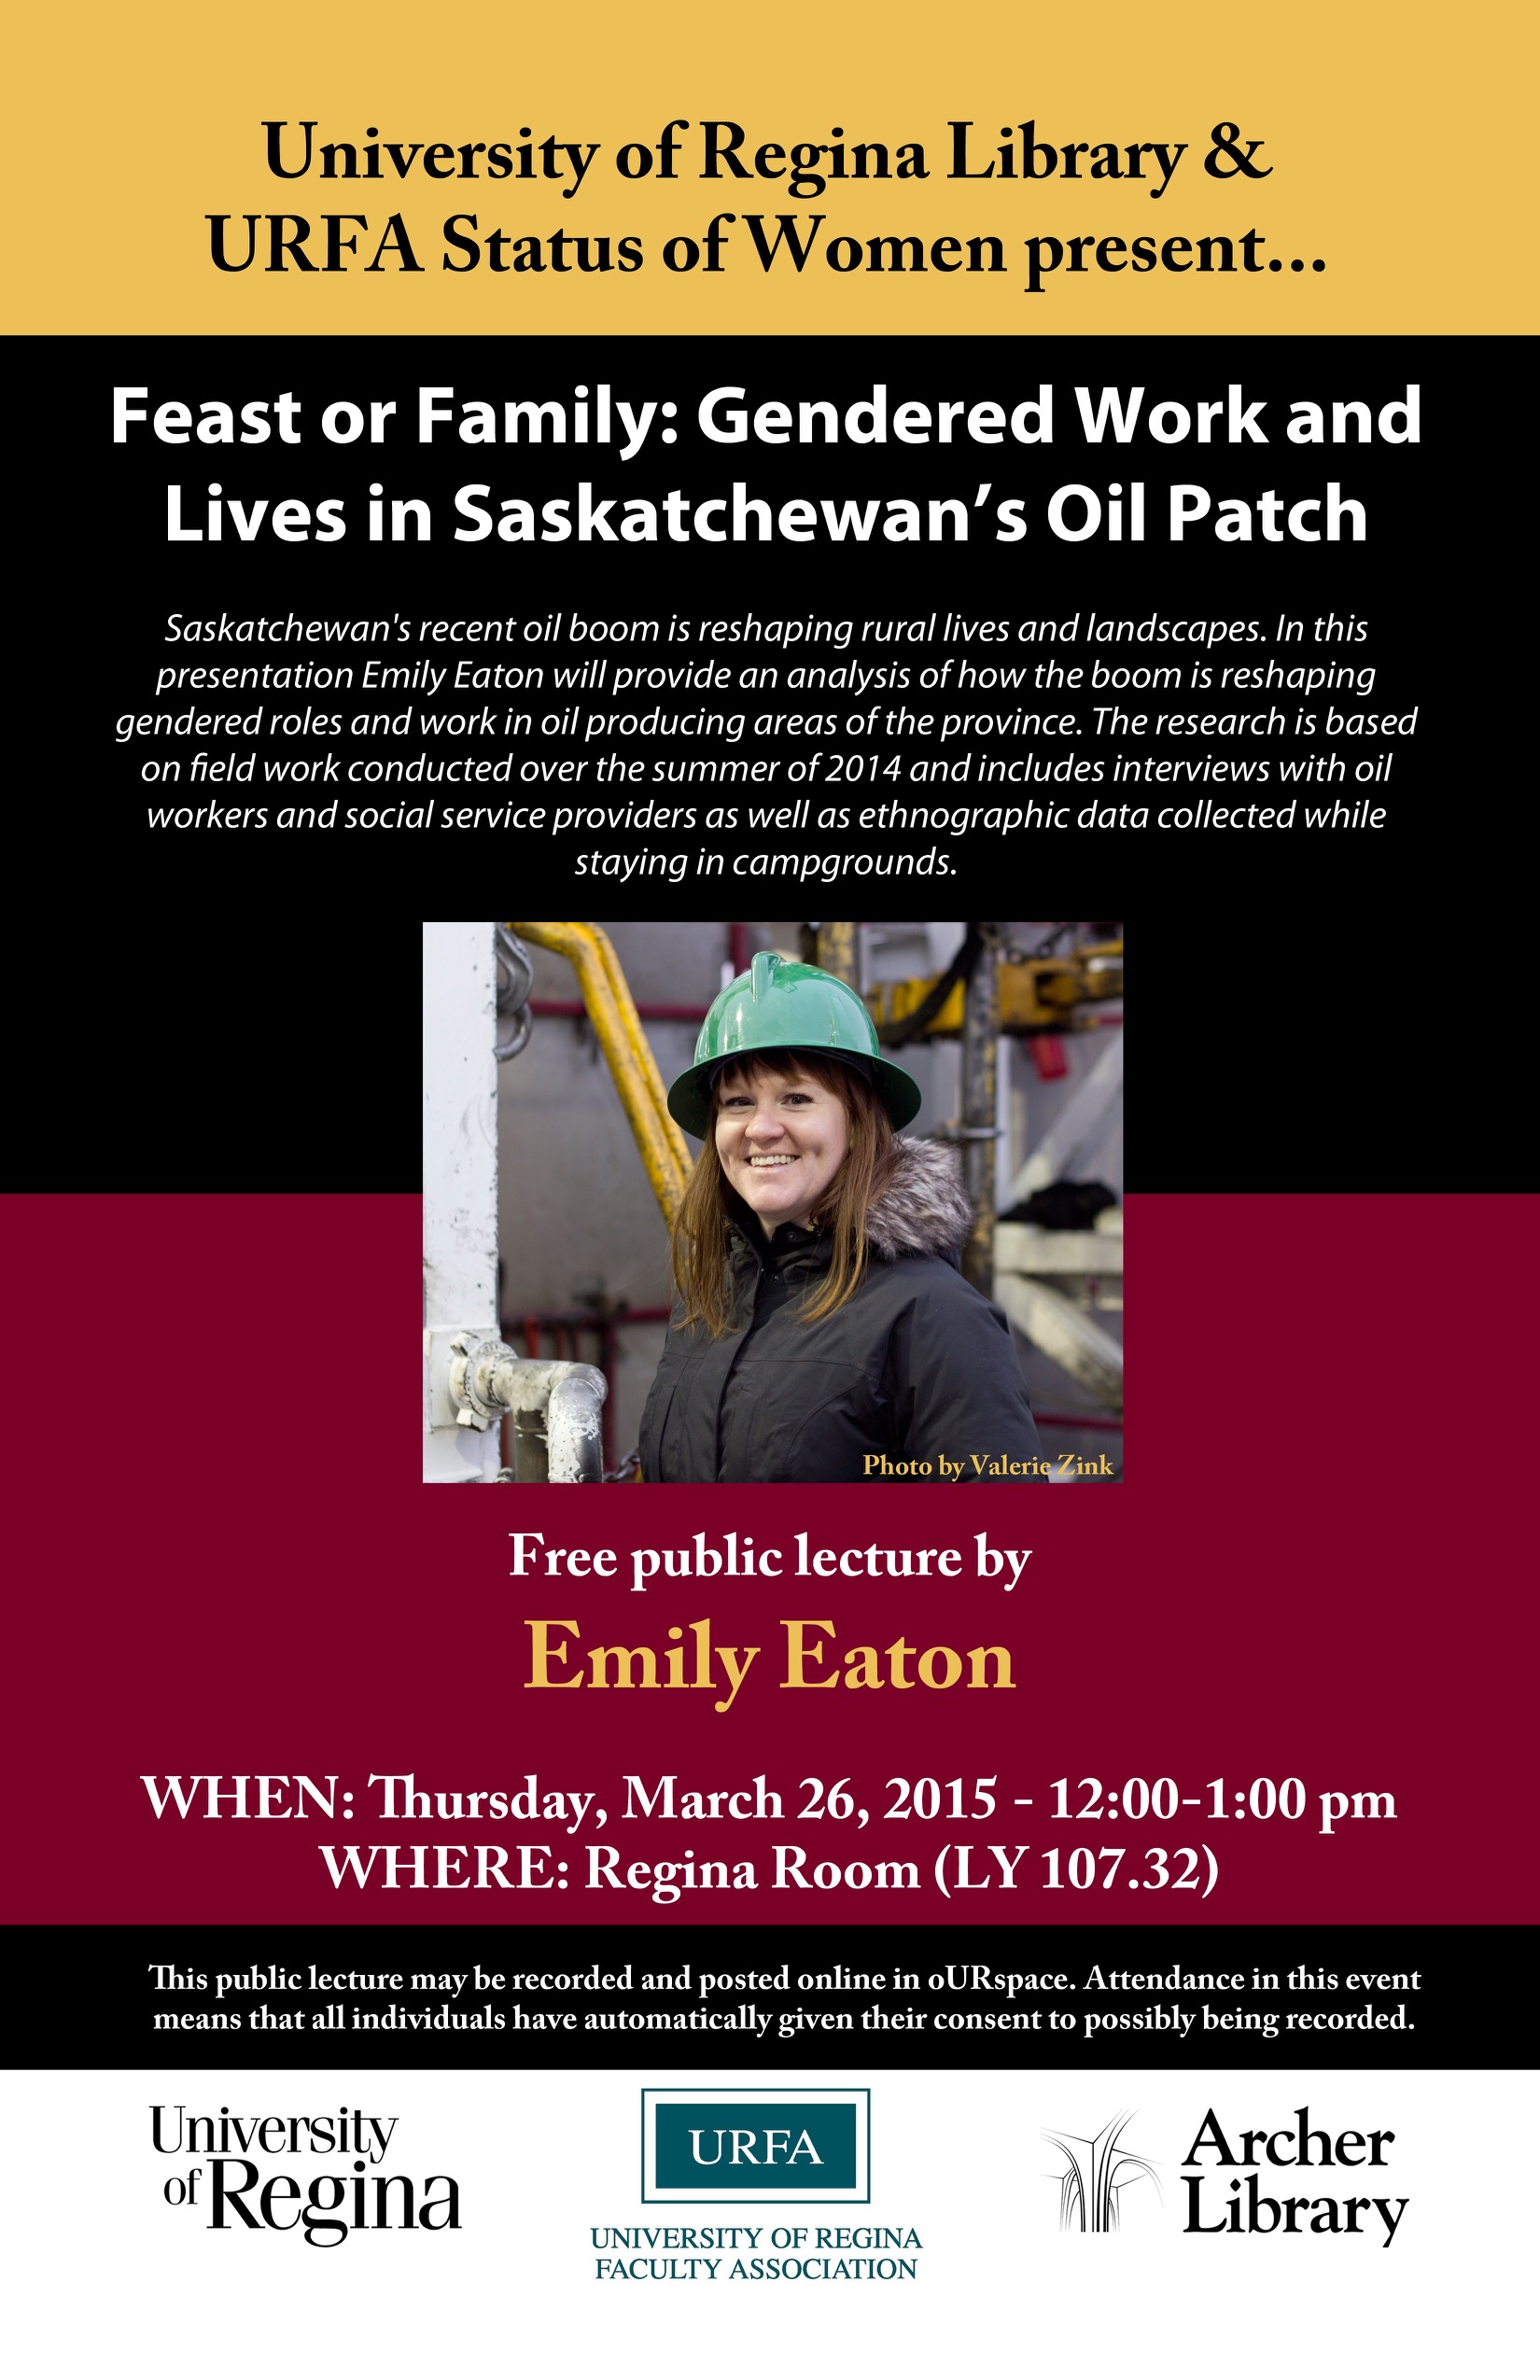 Feast or Family: Gendered Work and Lives in Saskatchewan's Oil Patch